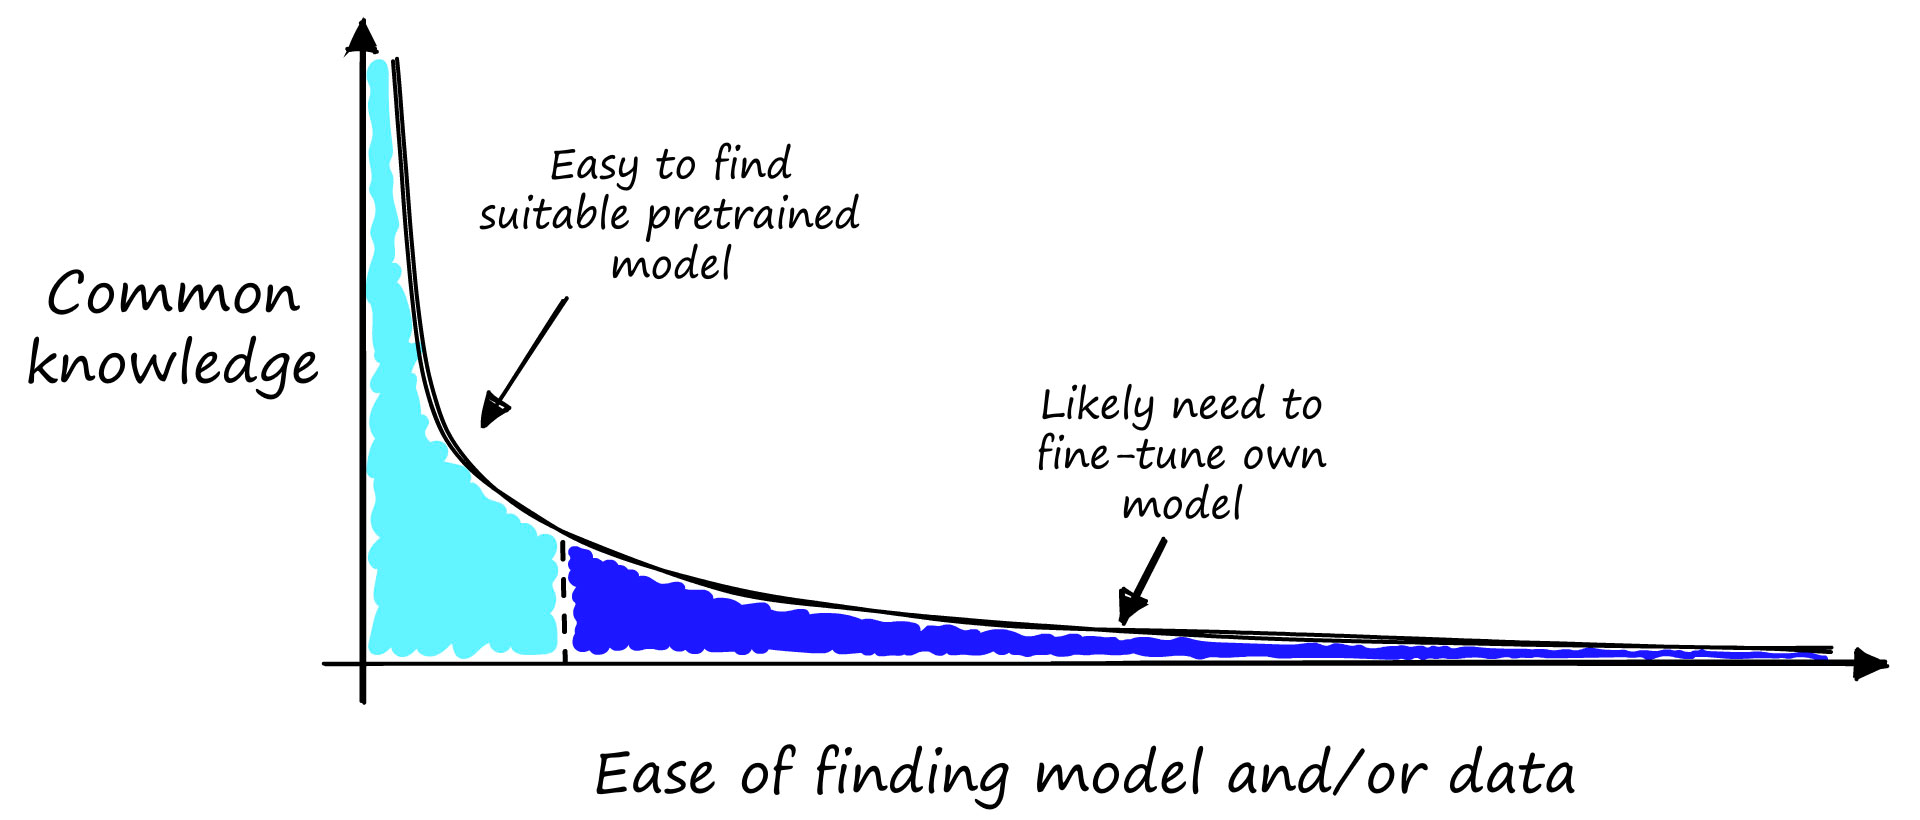 The more something is common knowledge (y-axis), the easier it is to find pretrained models that excel in the broader, more general scope. However, as before, most interesting use cases belong in the long-tail, and here is where we would need to fine-tune our own model.